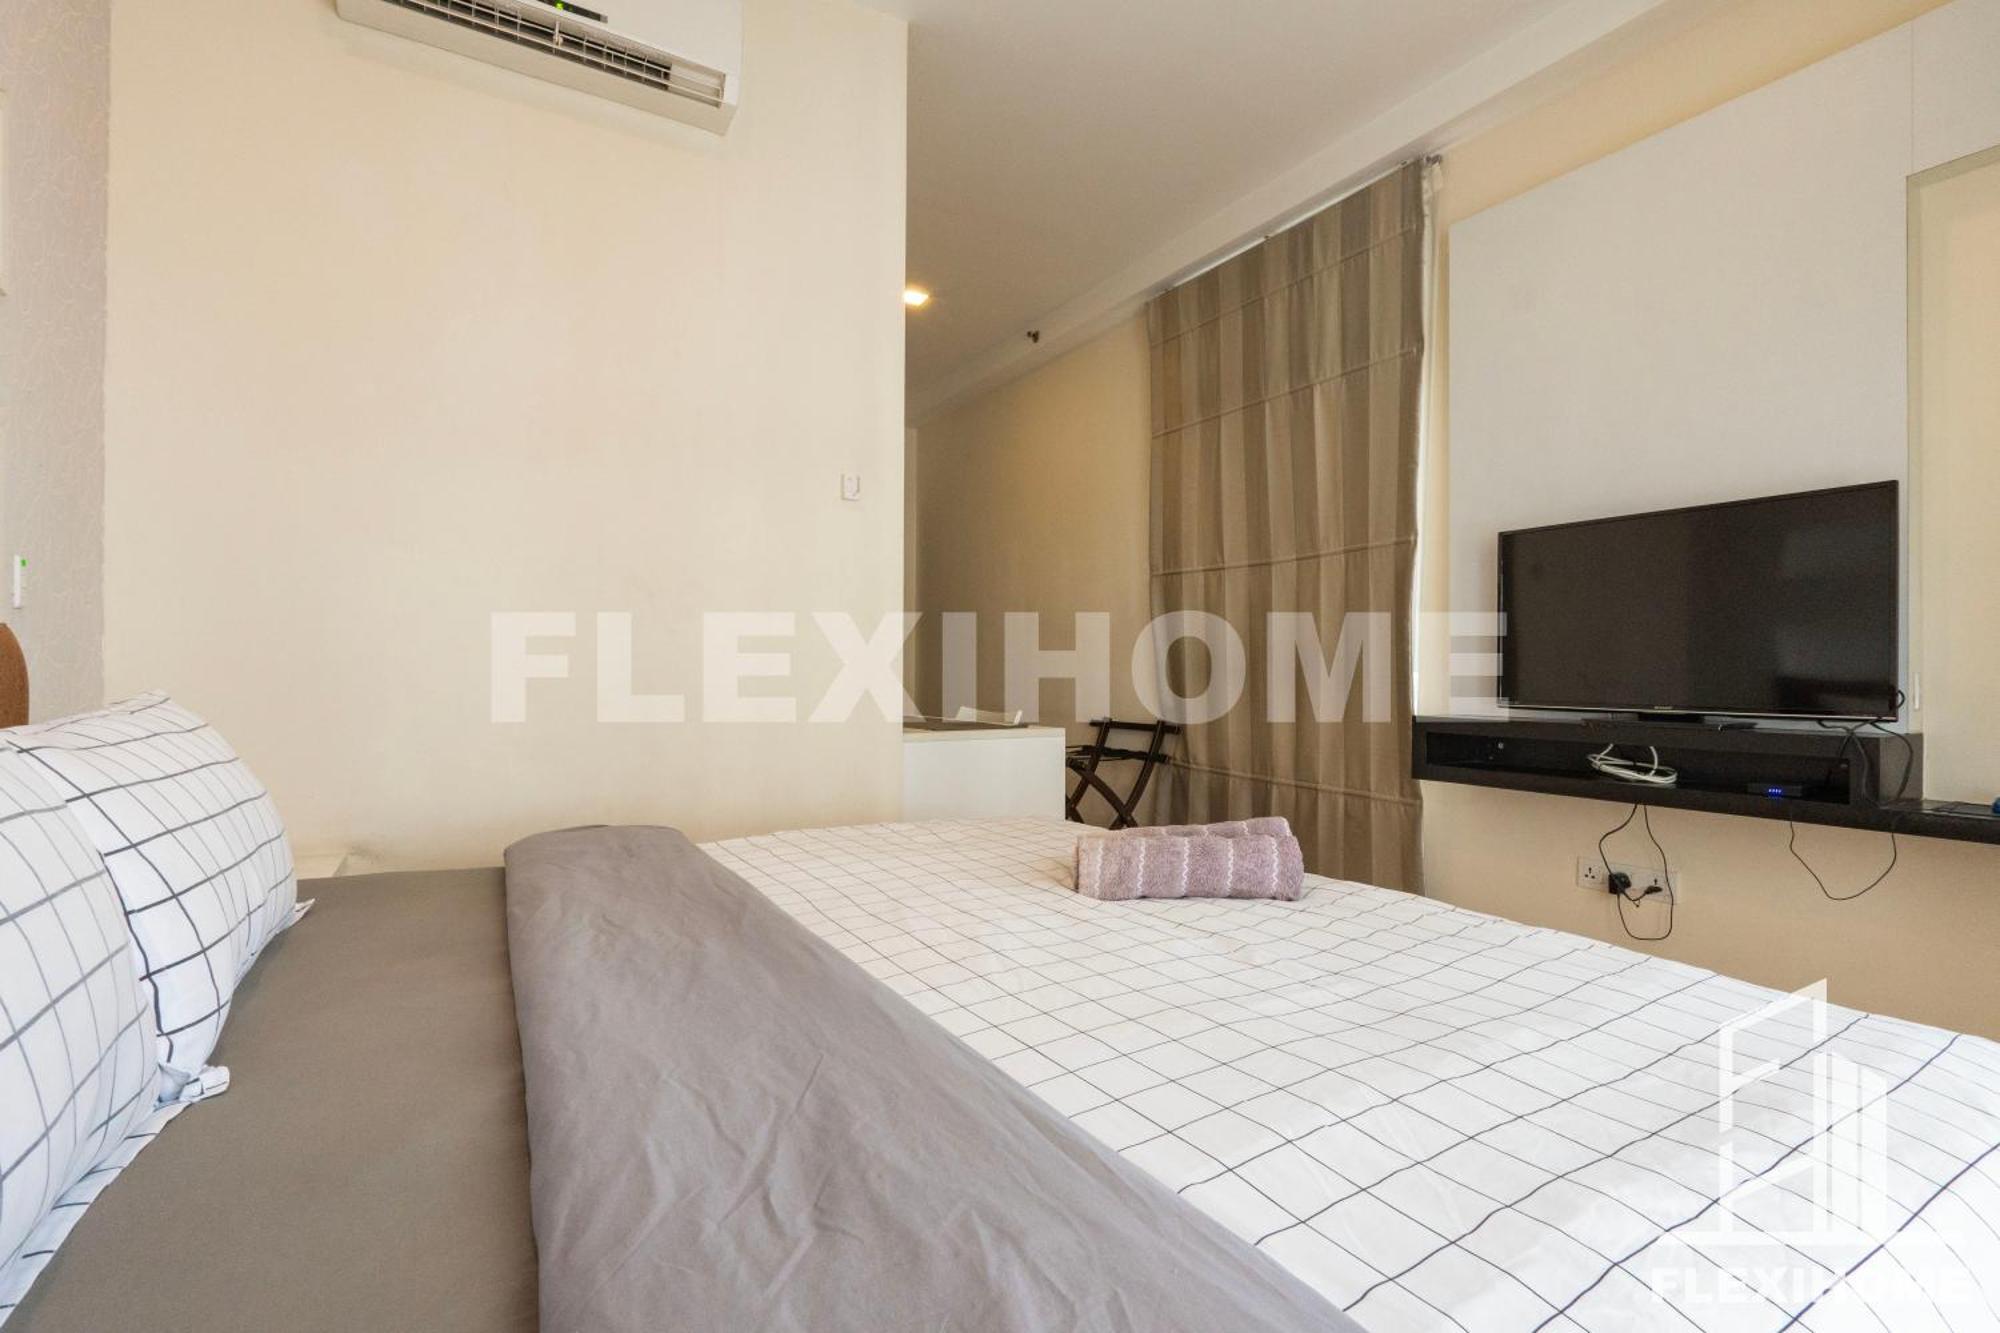 9Am-5Pm, Same Day Check In And Check Out, Work From Home, Shaftsbury-Cyberjaya, Comfy Home By Flexihome-My Экстерьер фото